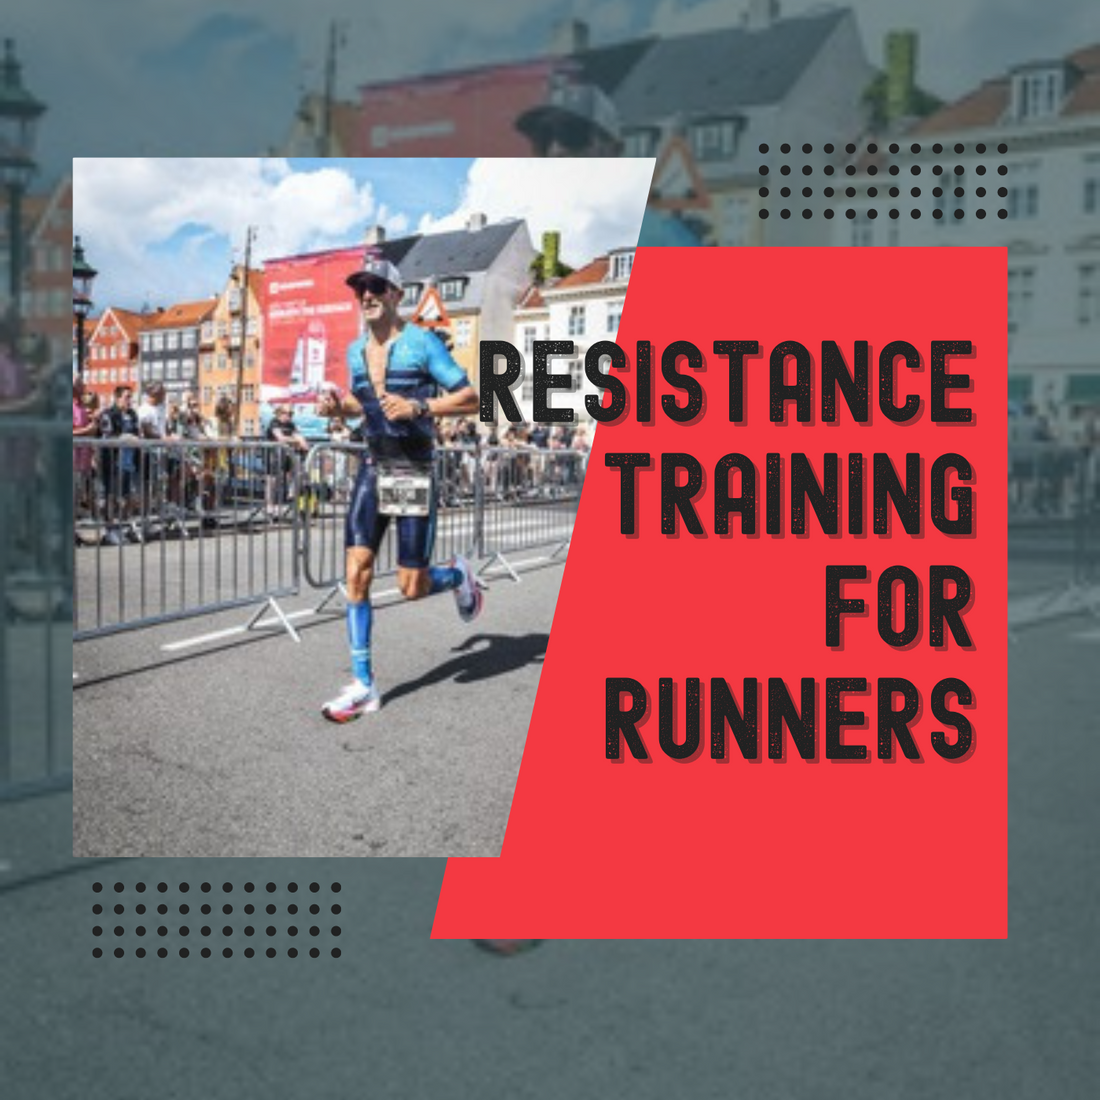 RESISTANCE (strength) Training for Runners